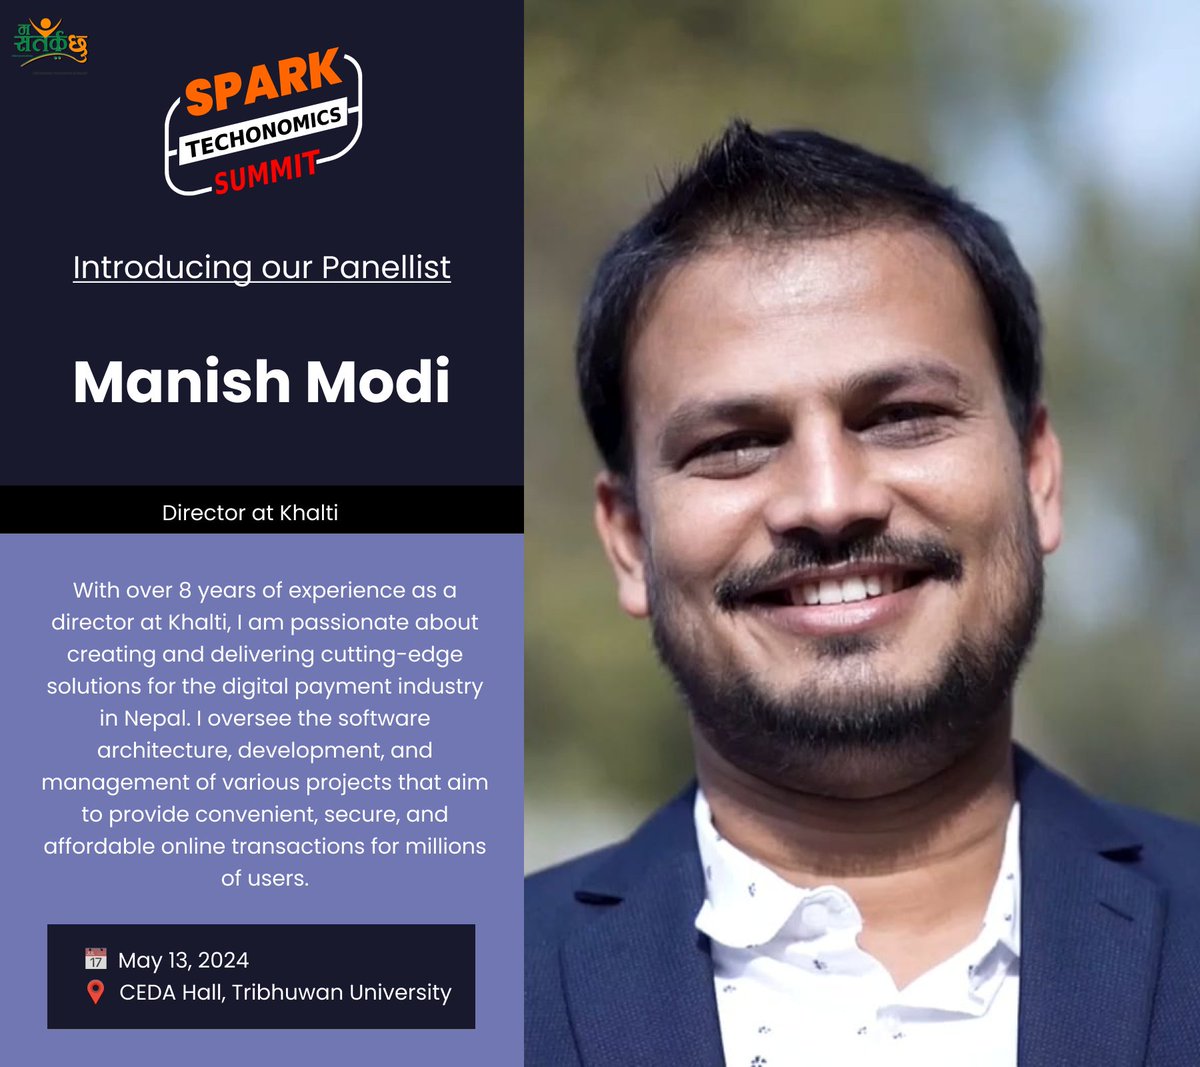 Excited to have Manish Modi, Director at Khalti fintech, join us at Spark Techonomics Summit! #TechonomicsSummit #Fintech Participation Registration Form: bit.ly/sts-join StartUp Presentation Registration Form: bit.ly/sts-startup